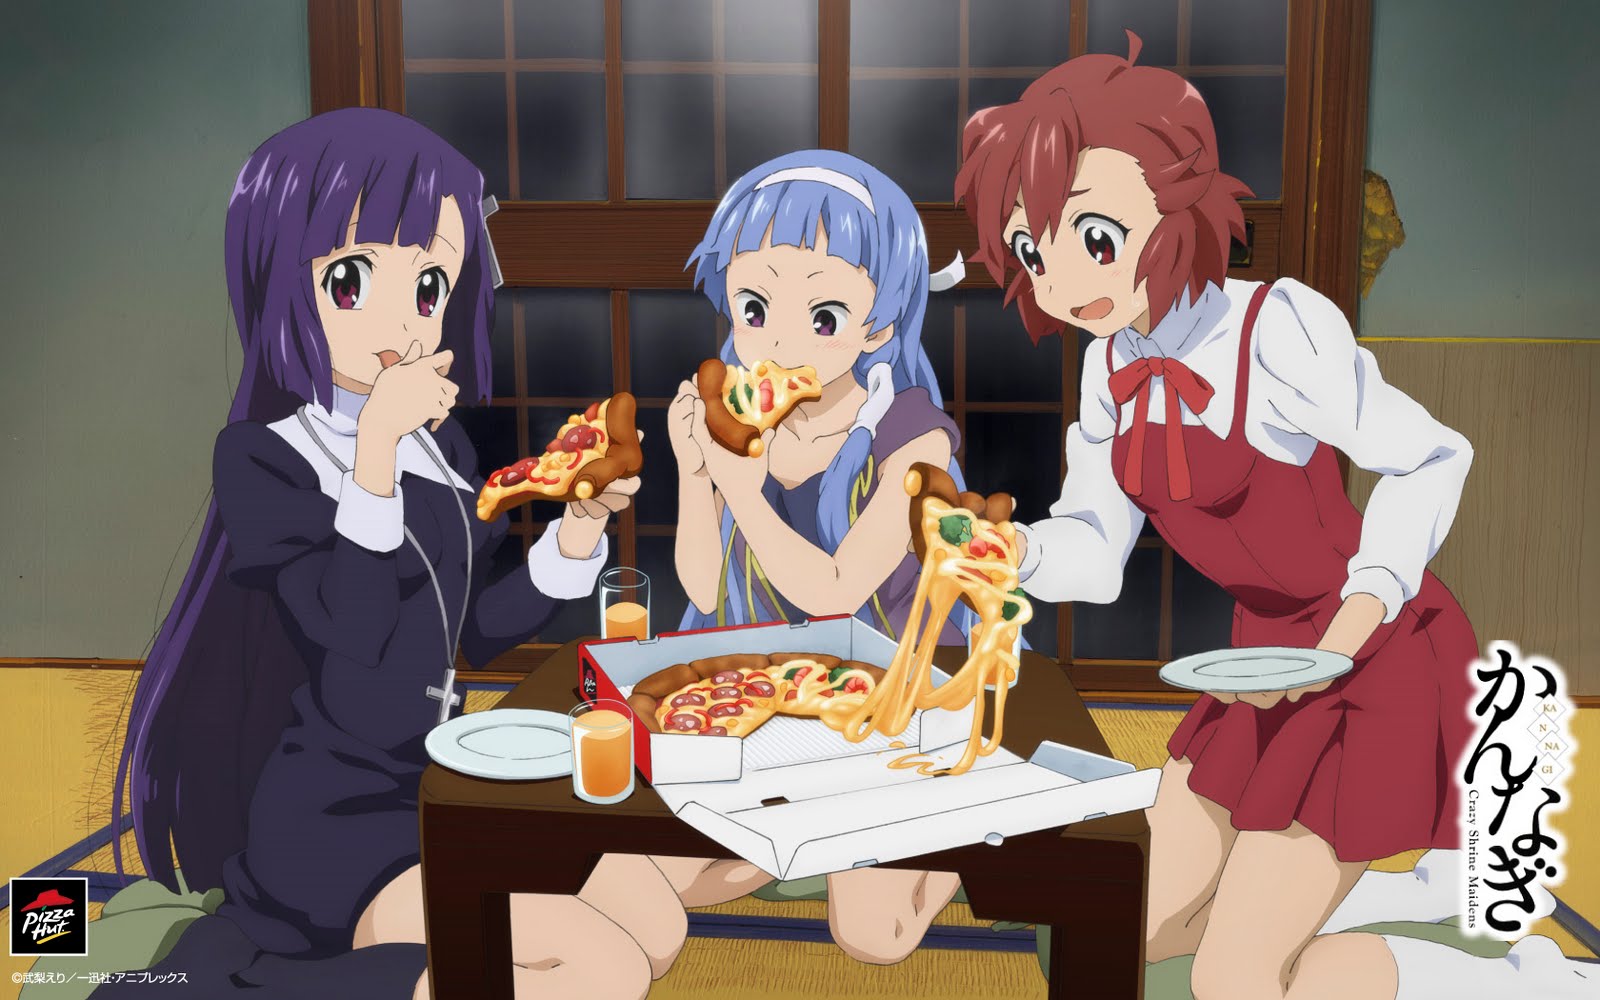 Pizza Hut Loves Anime (at least, in Japan) - AstroNerdBoy's Anime & Manga  Blog | AstroNerdBoy's Anime & Manga Blog